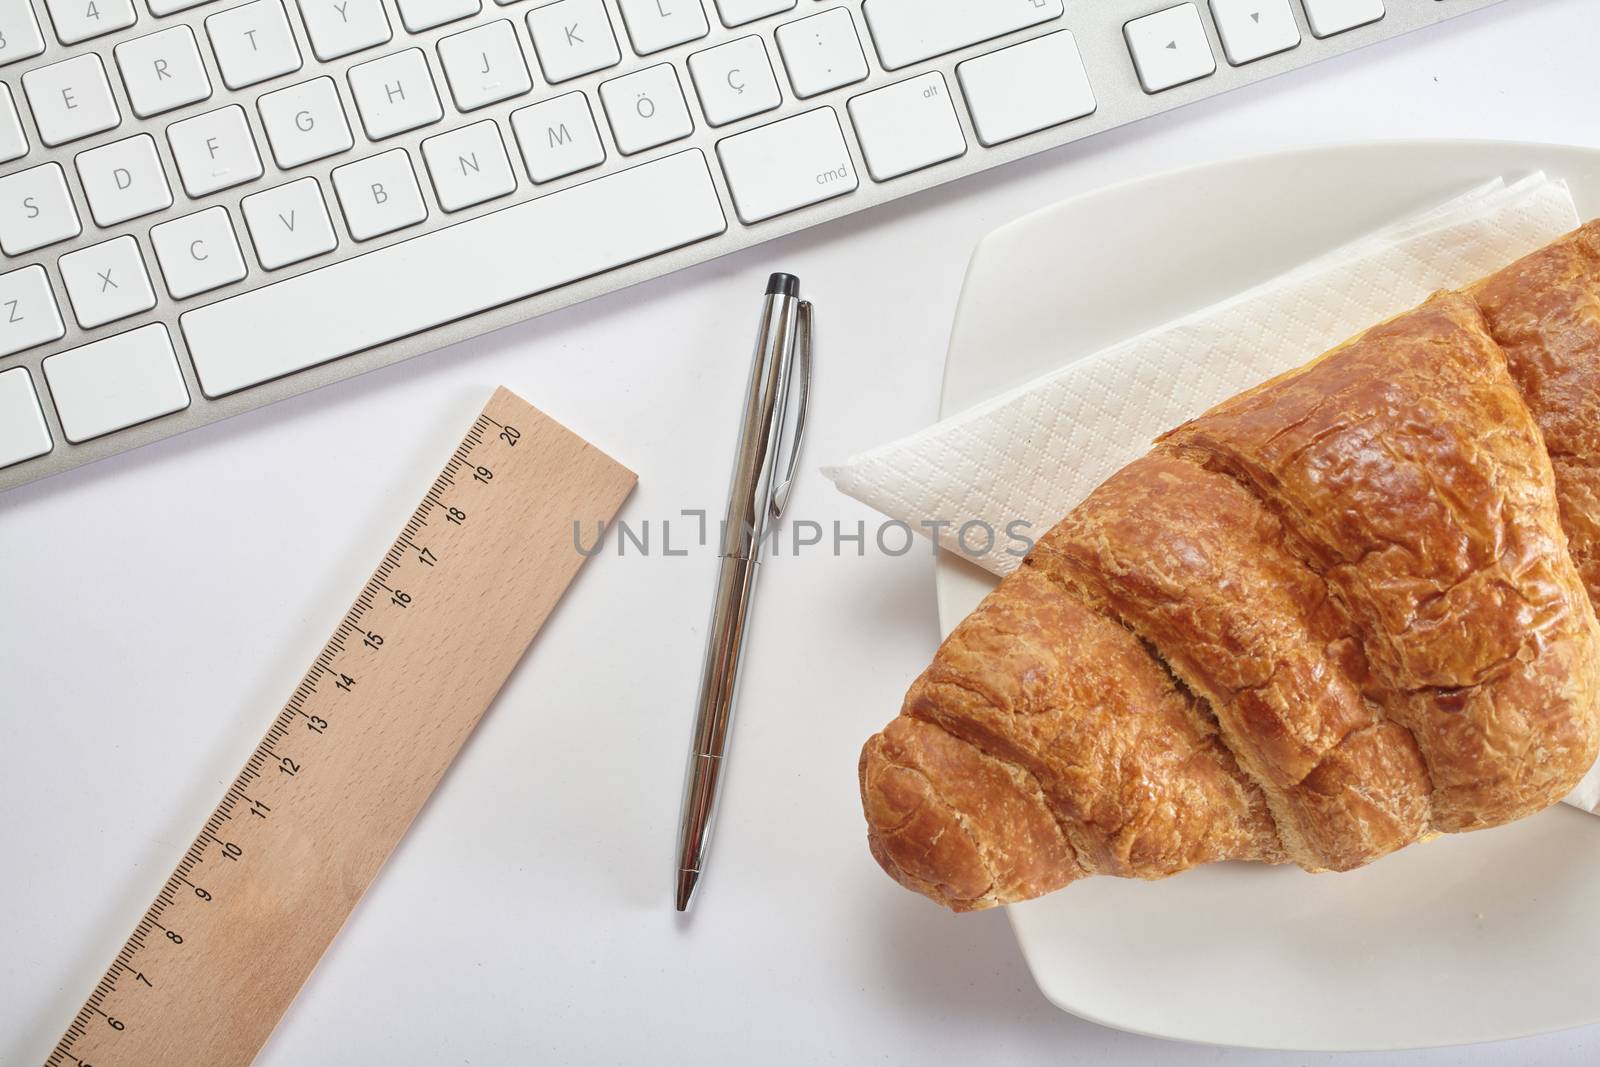 Top view office workplace - keyboard, pen, ruler and croissant on white table